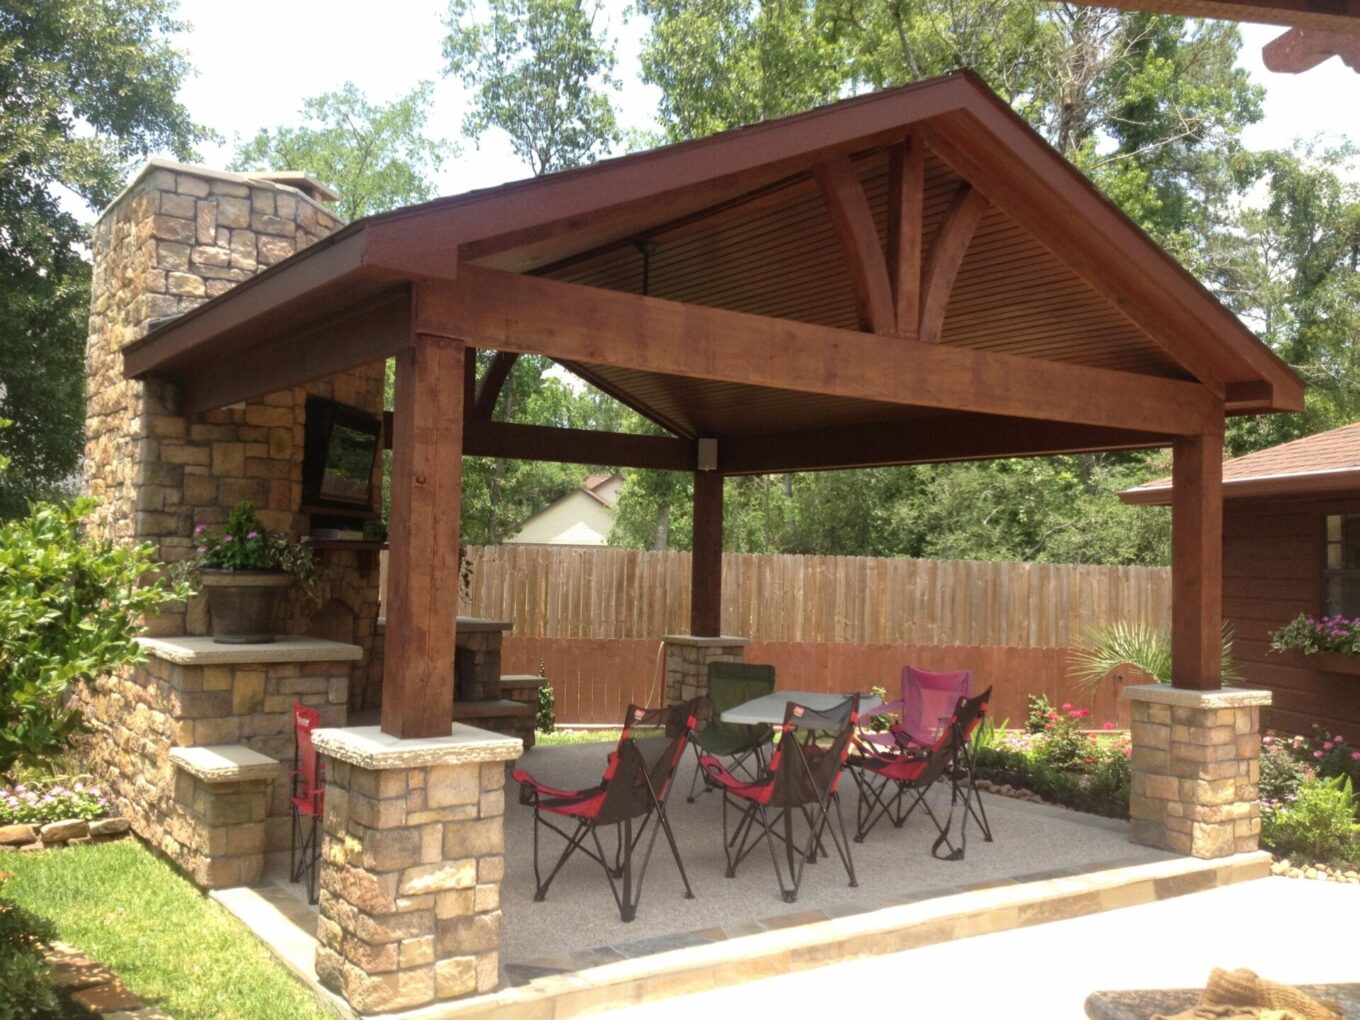 A covered patio with chairs and tables in it.